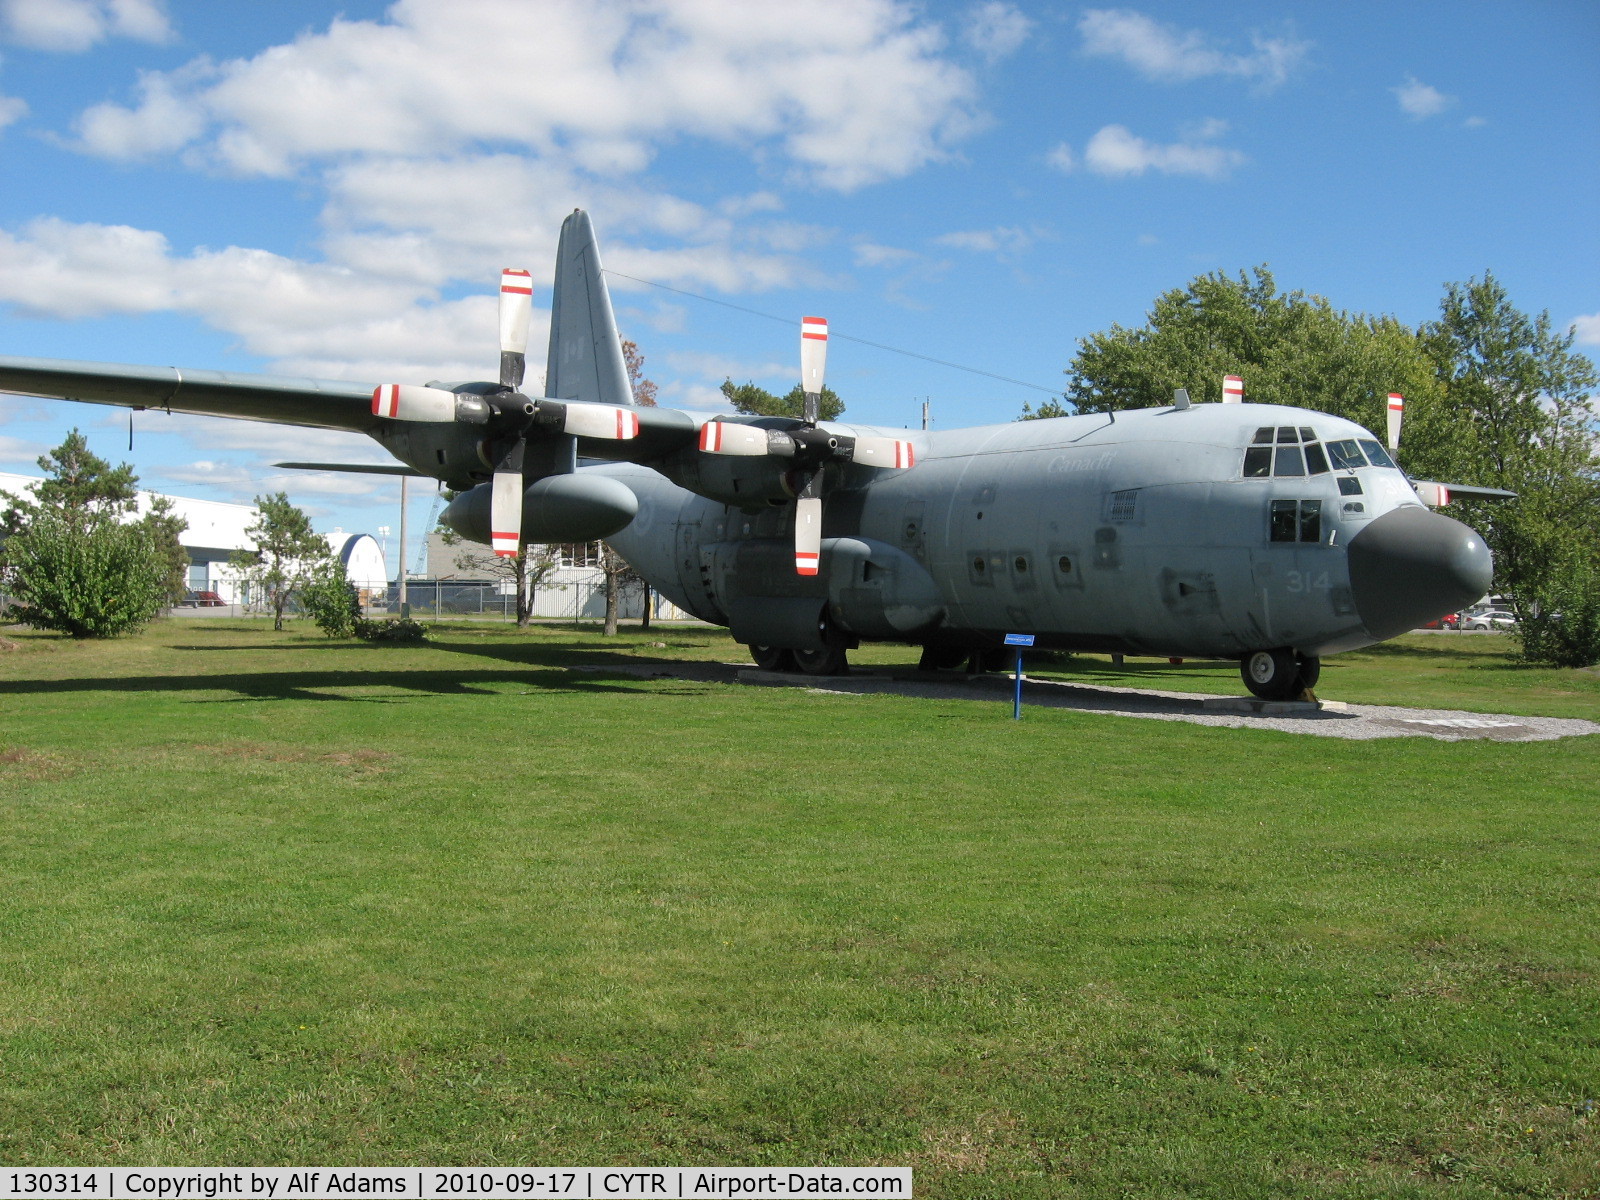 130314, 1965 Lockheed CC-130E Hercules C/N 382-4067, C-130E Hercules retired from the Royal Canadian Air Force and now displayed at the National Air Force Museum of Canada at CFB Trenton, Ontario, Canada.